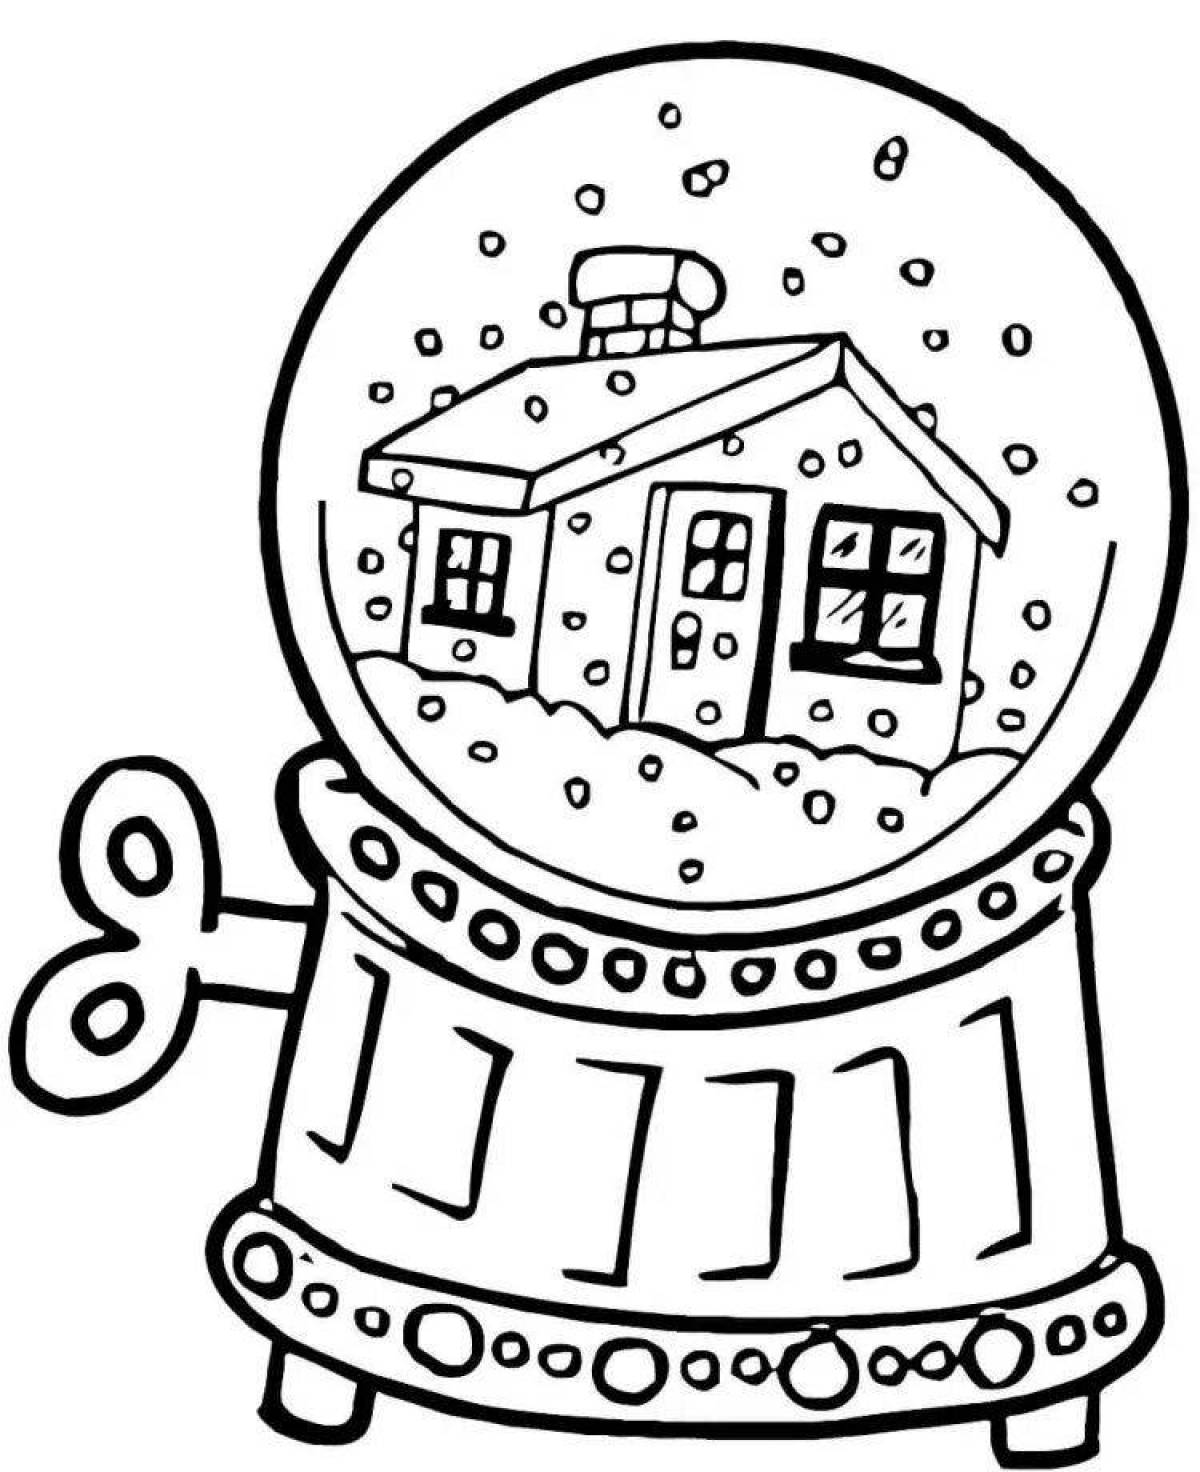 Coloring page festive winter ball